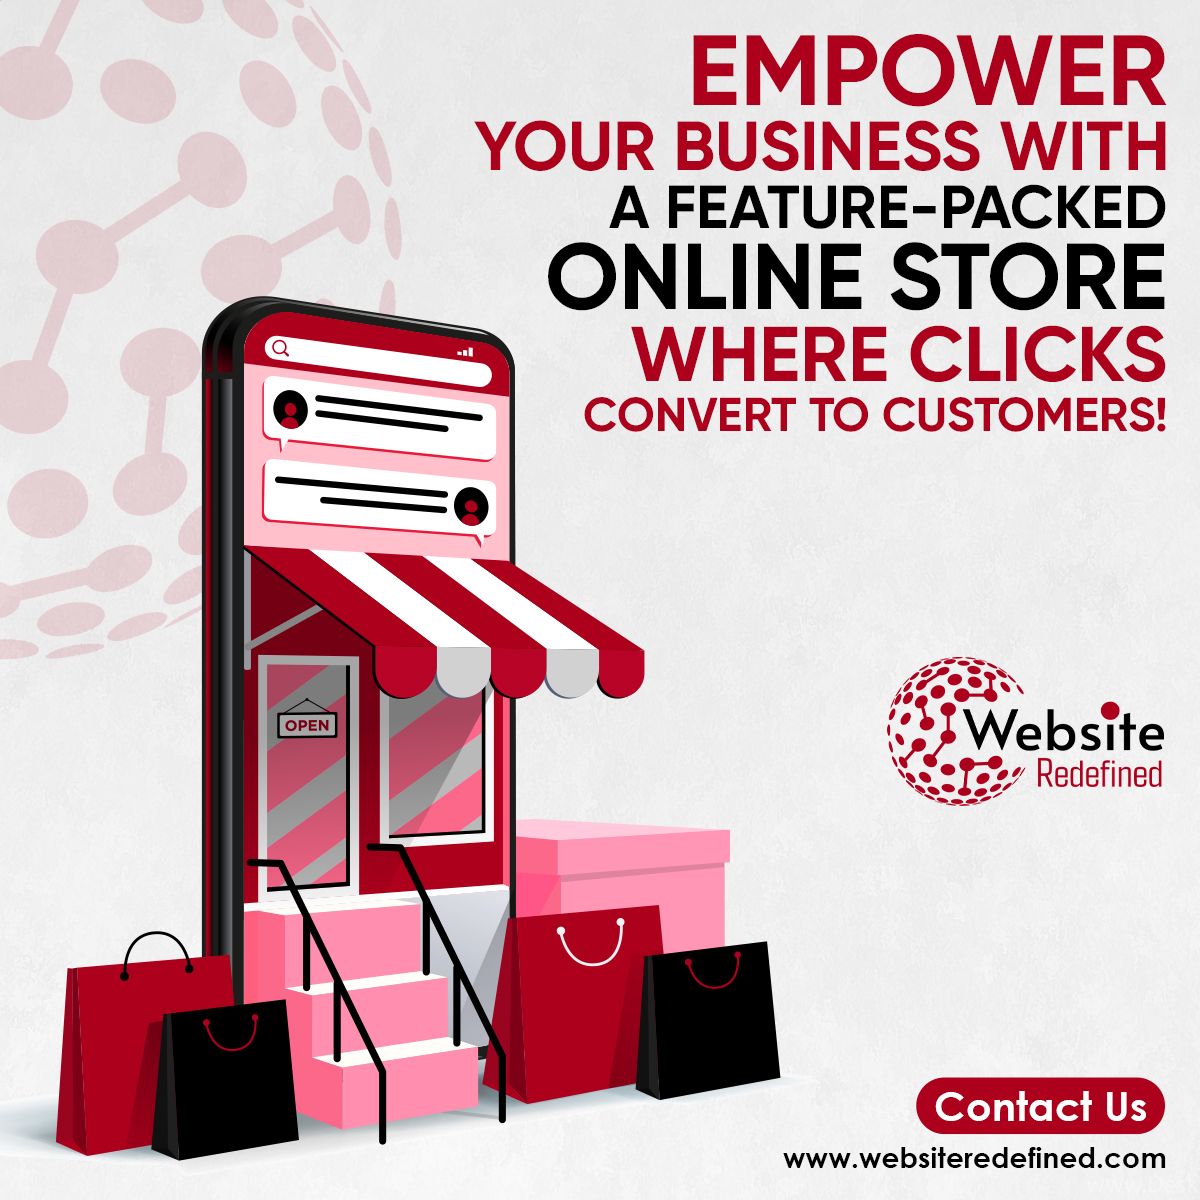 Your online store - A powerhouse of features! Enrich customer experiences with seamless navigation and captivating functionality. Maximize conversions!

Contact Us!
websiteredefined.com

#websiteloading #websiteredefined